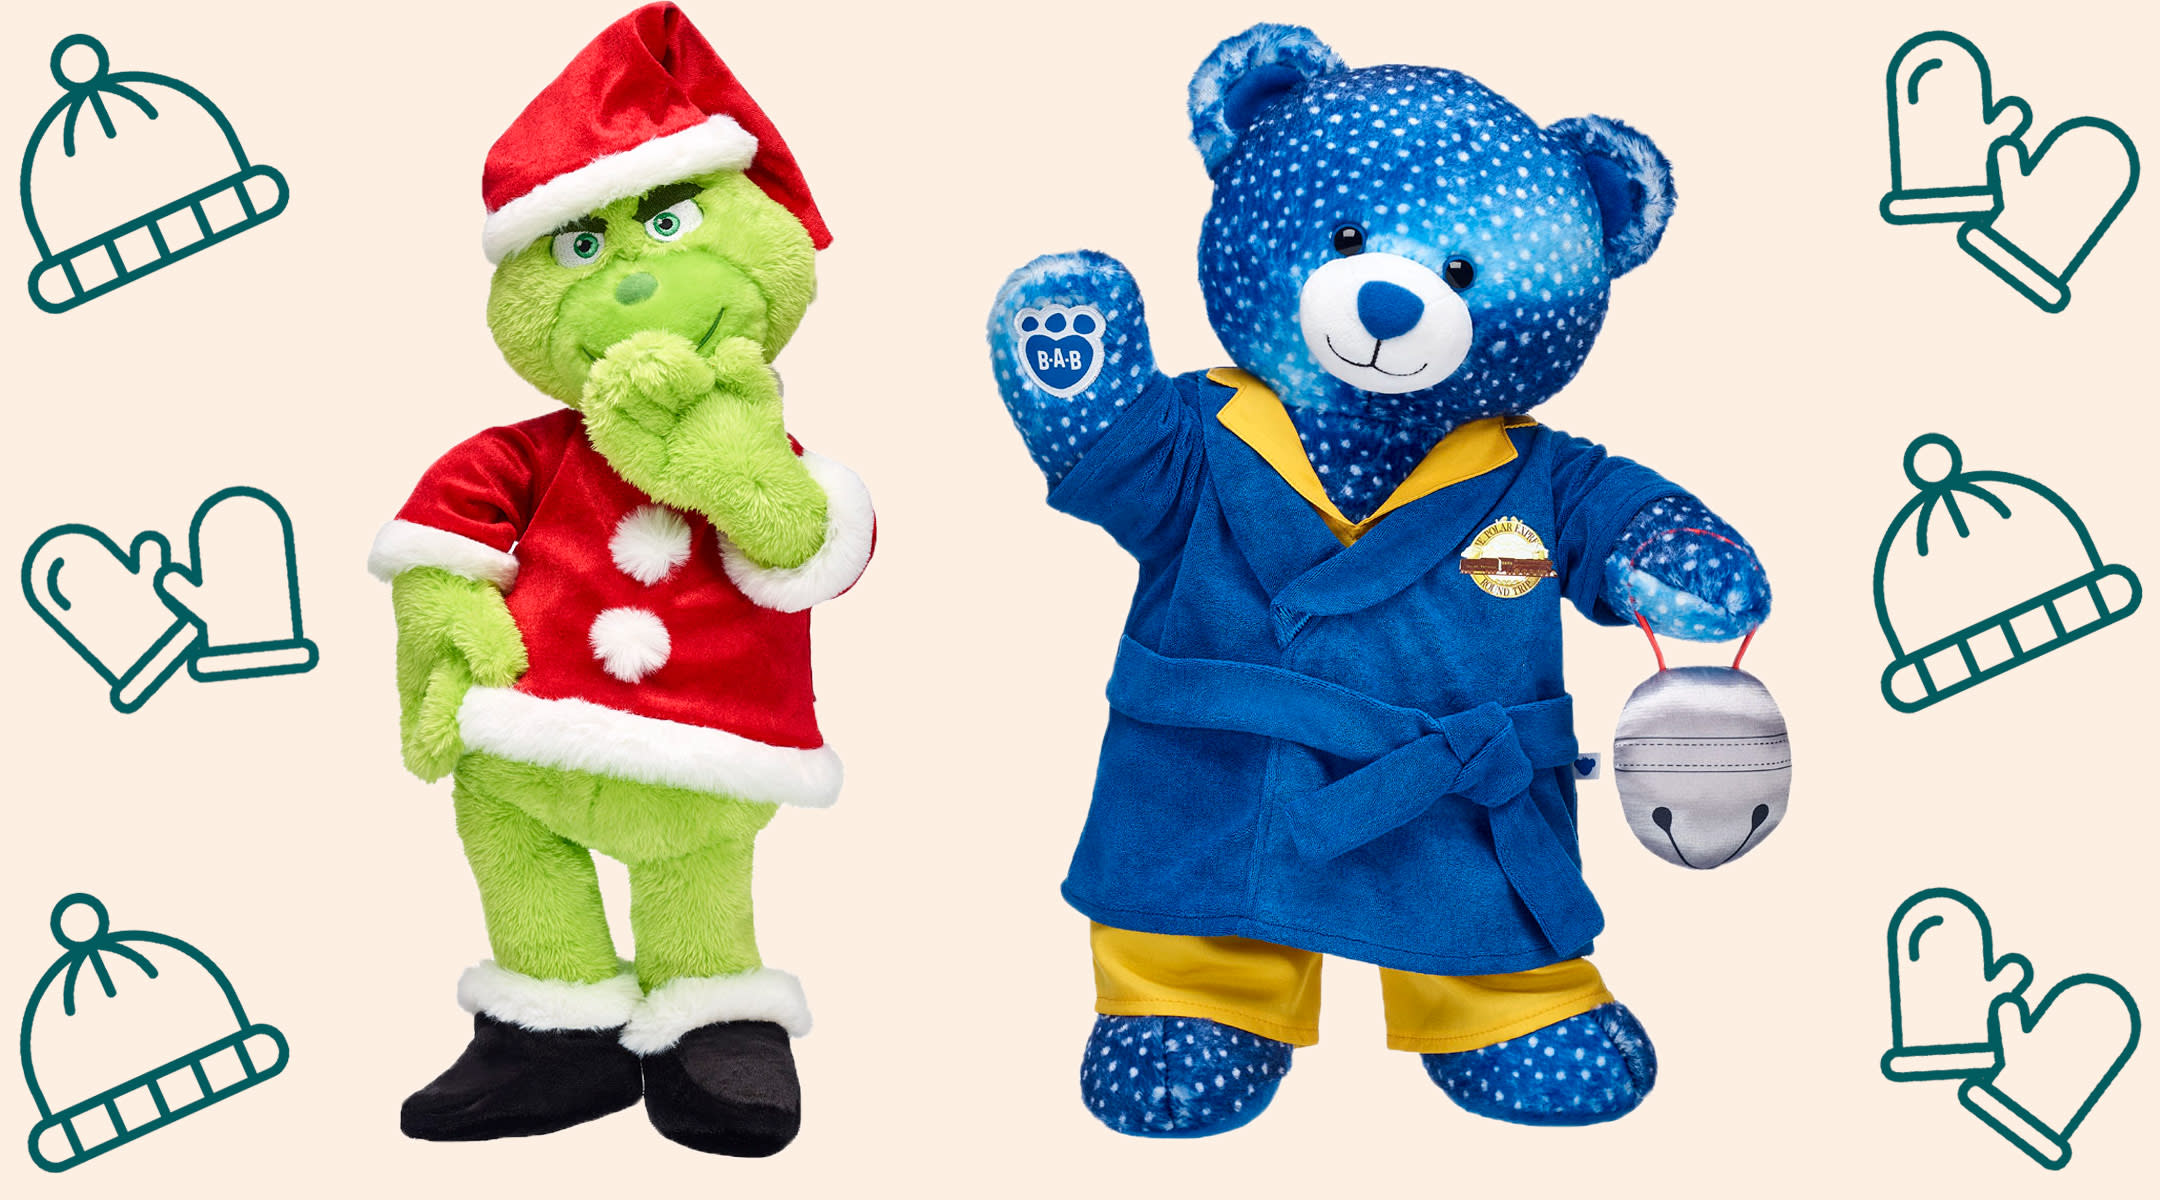 BuildABear is Bringing all the Christmas Favorites for the Holidays